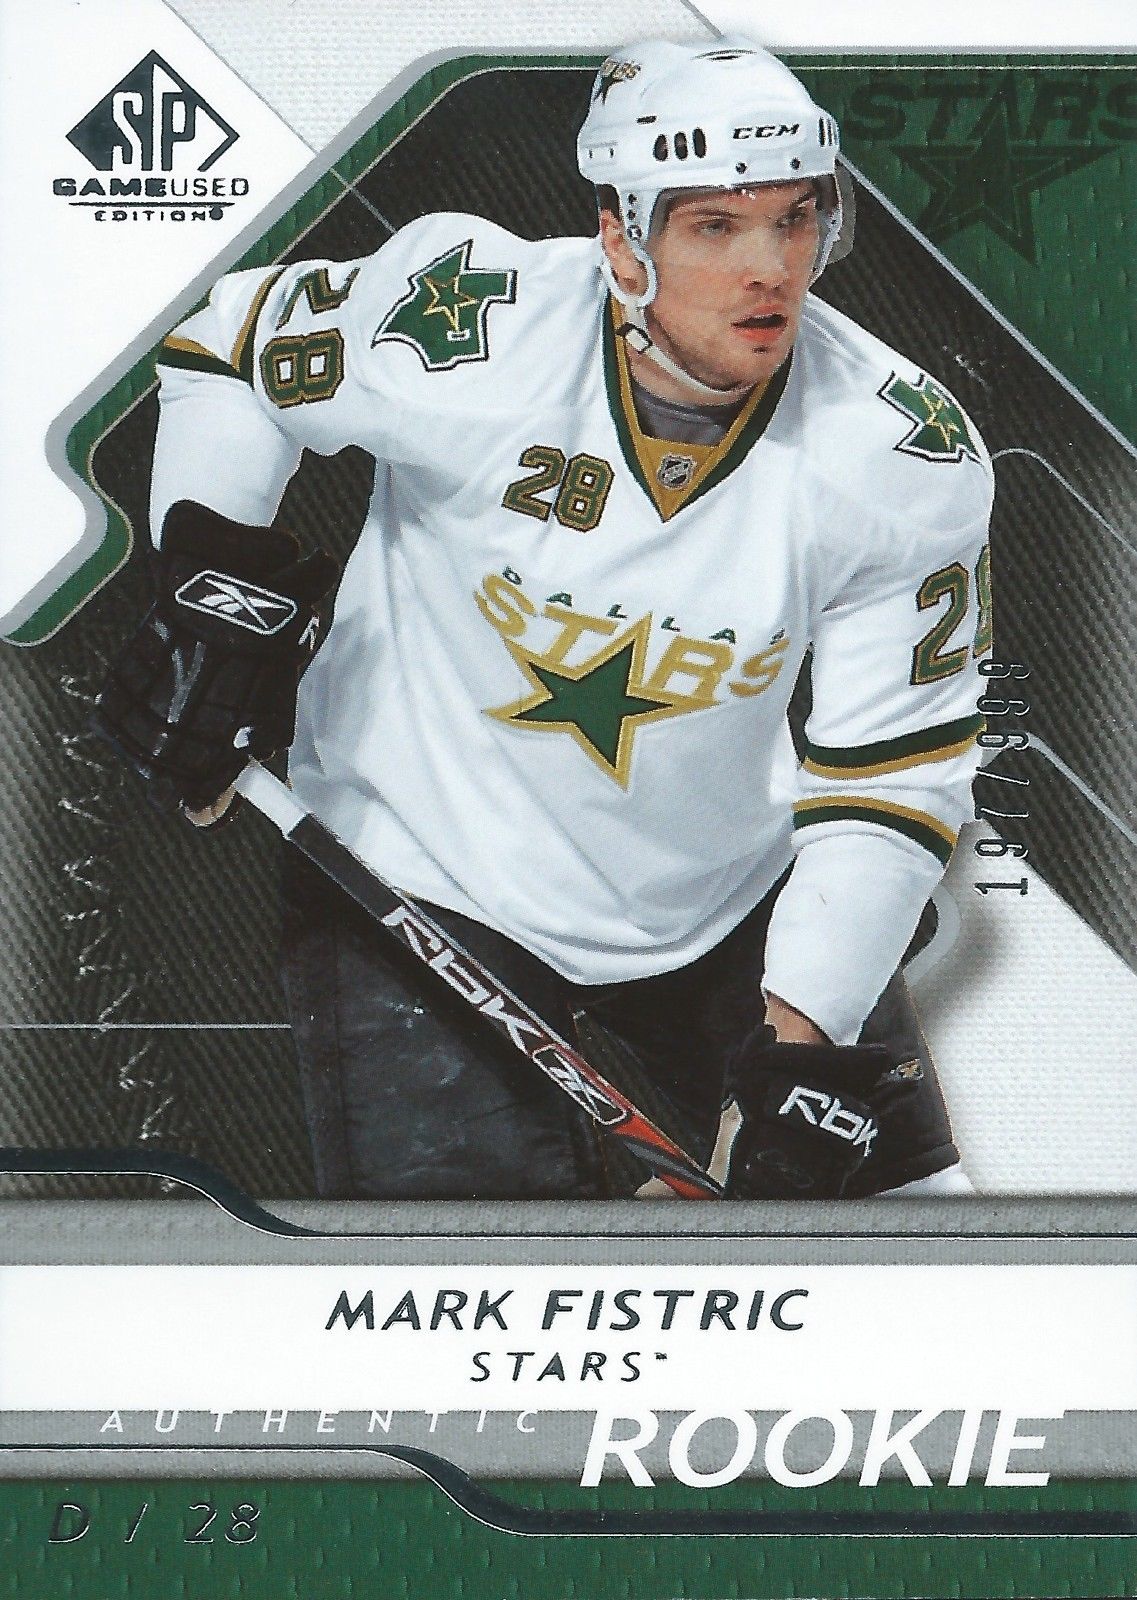  2008-09 SP Game Used MARK FISTRIC Rookie /999 Upper Deck RC NHL 01555 Image 1